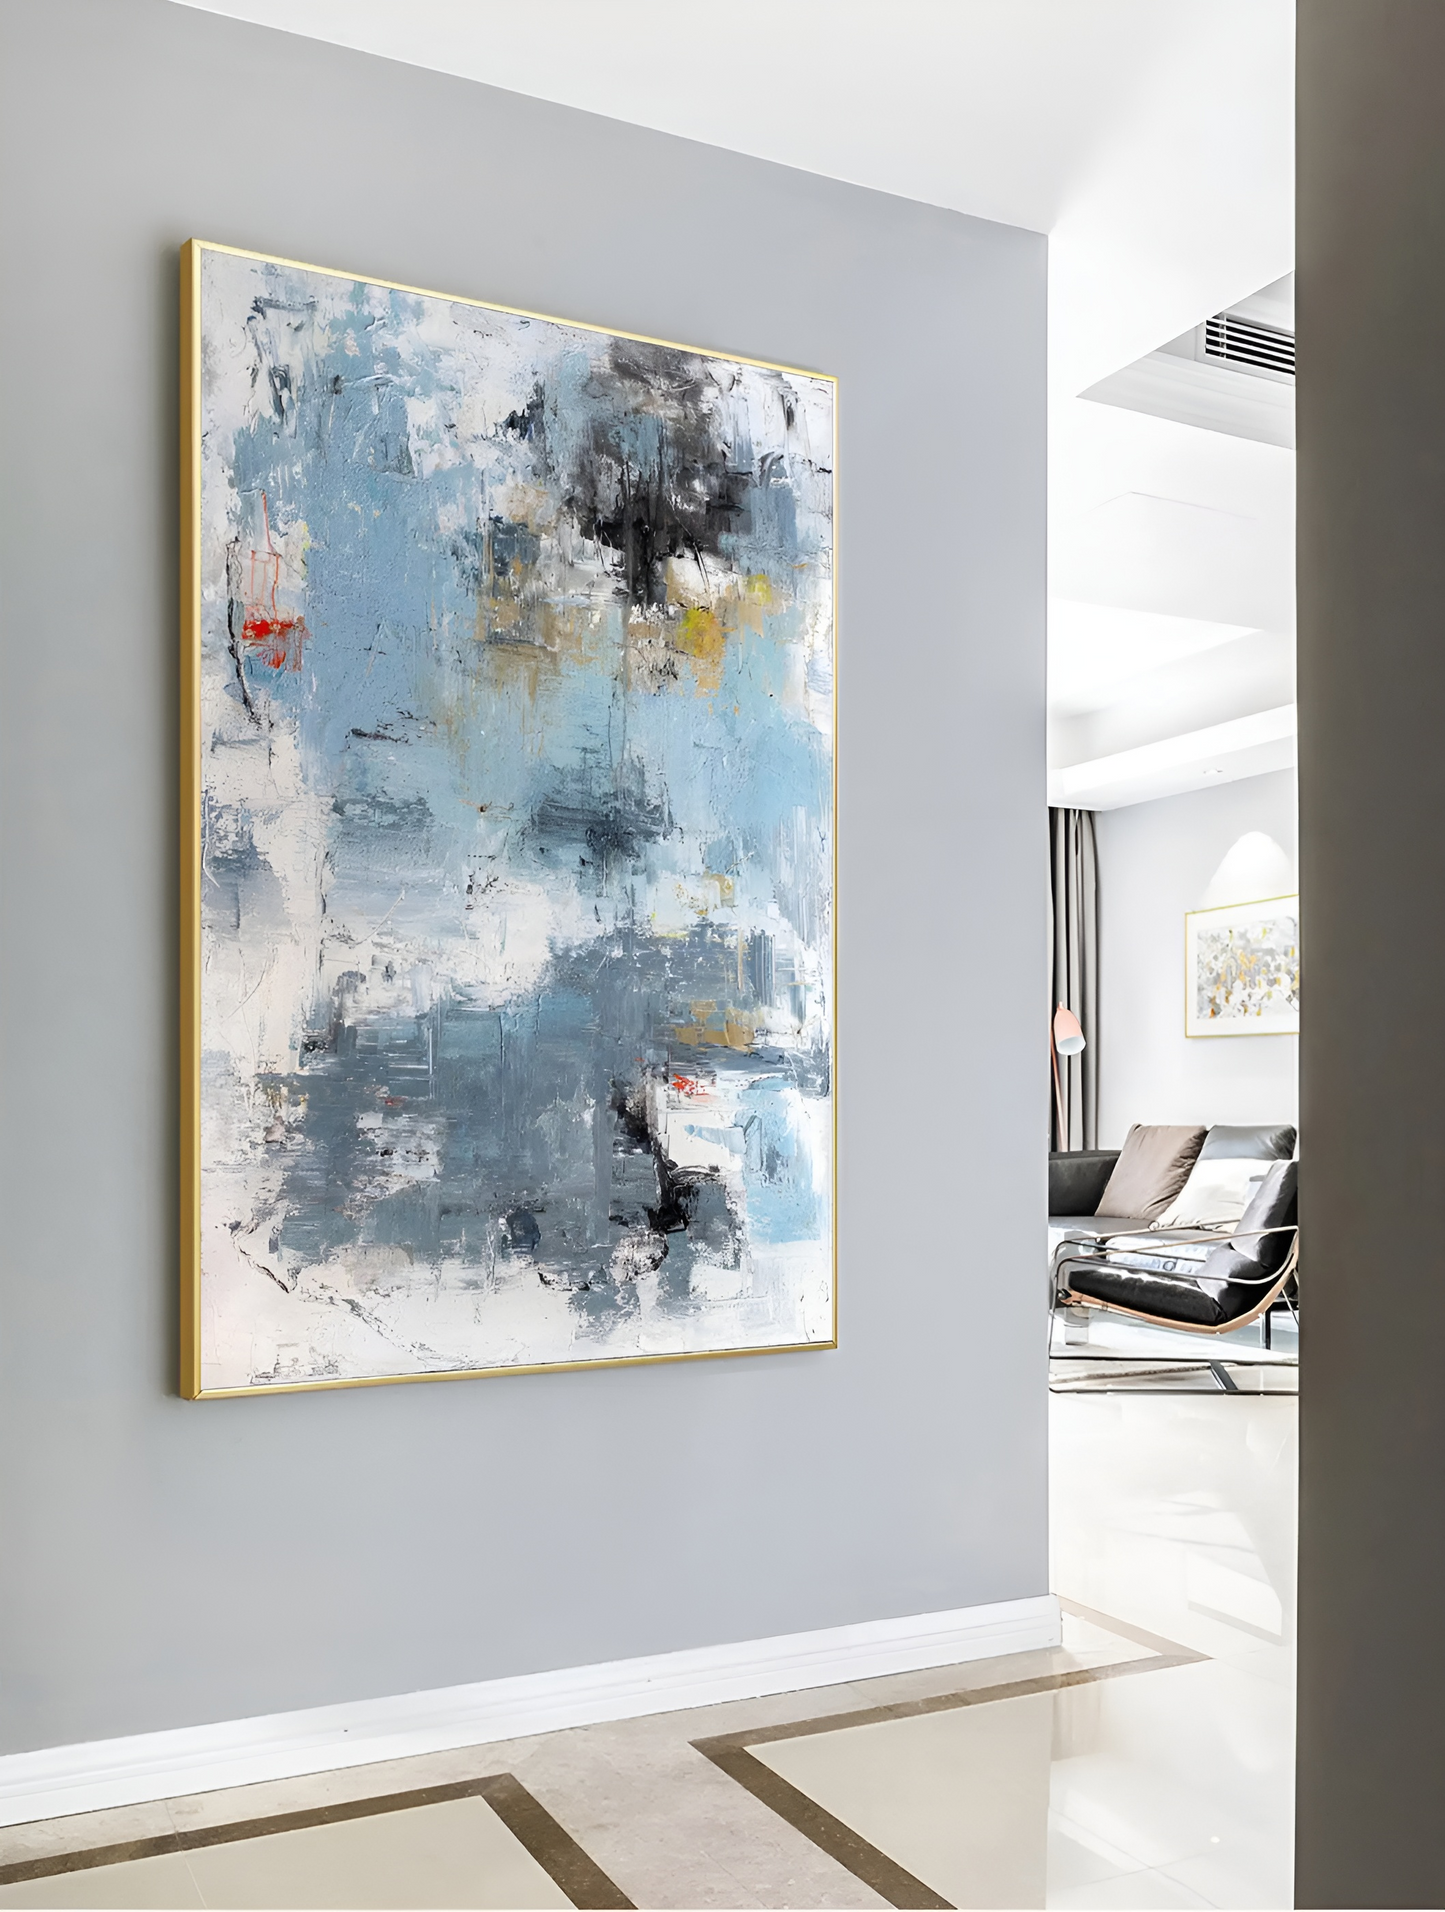 Angelic - Large Abstract Blue and White Painting on Canvas